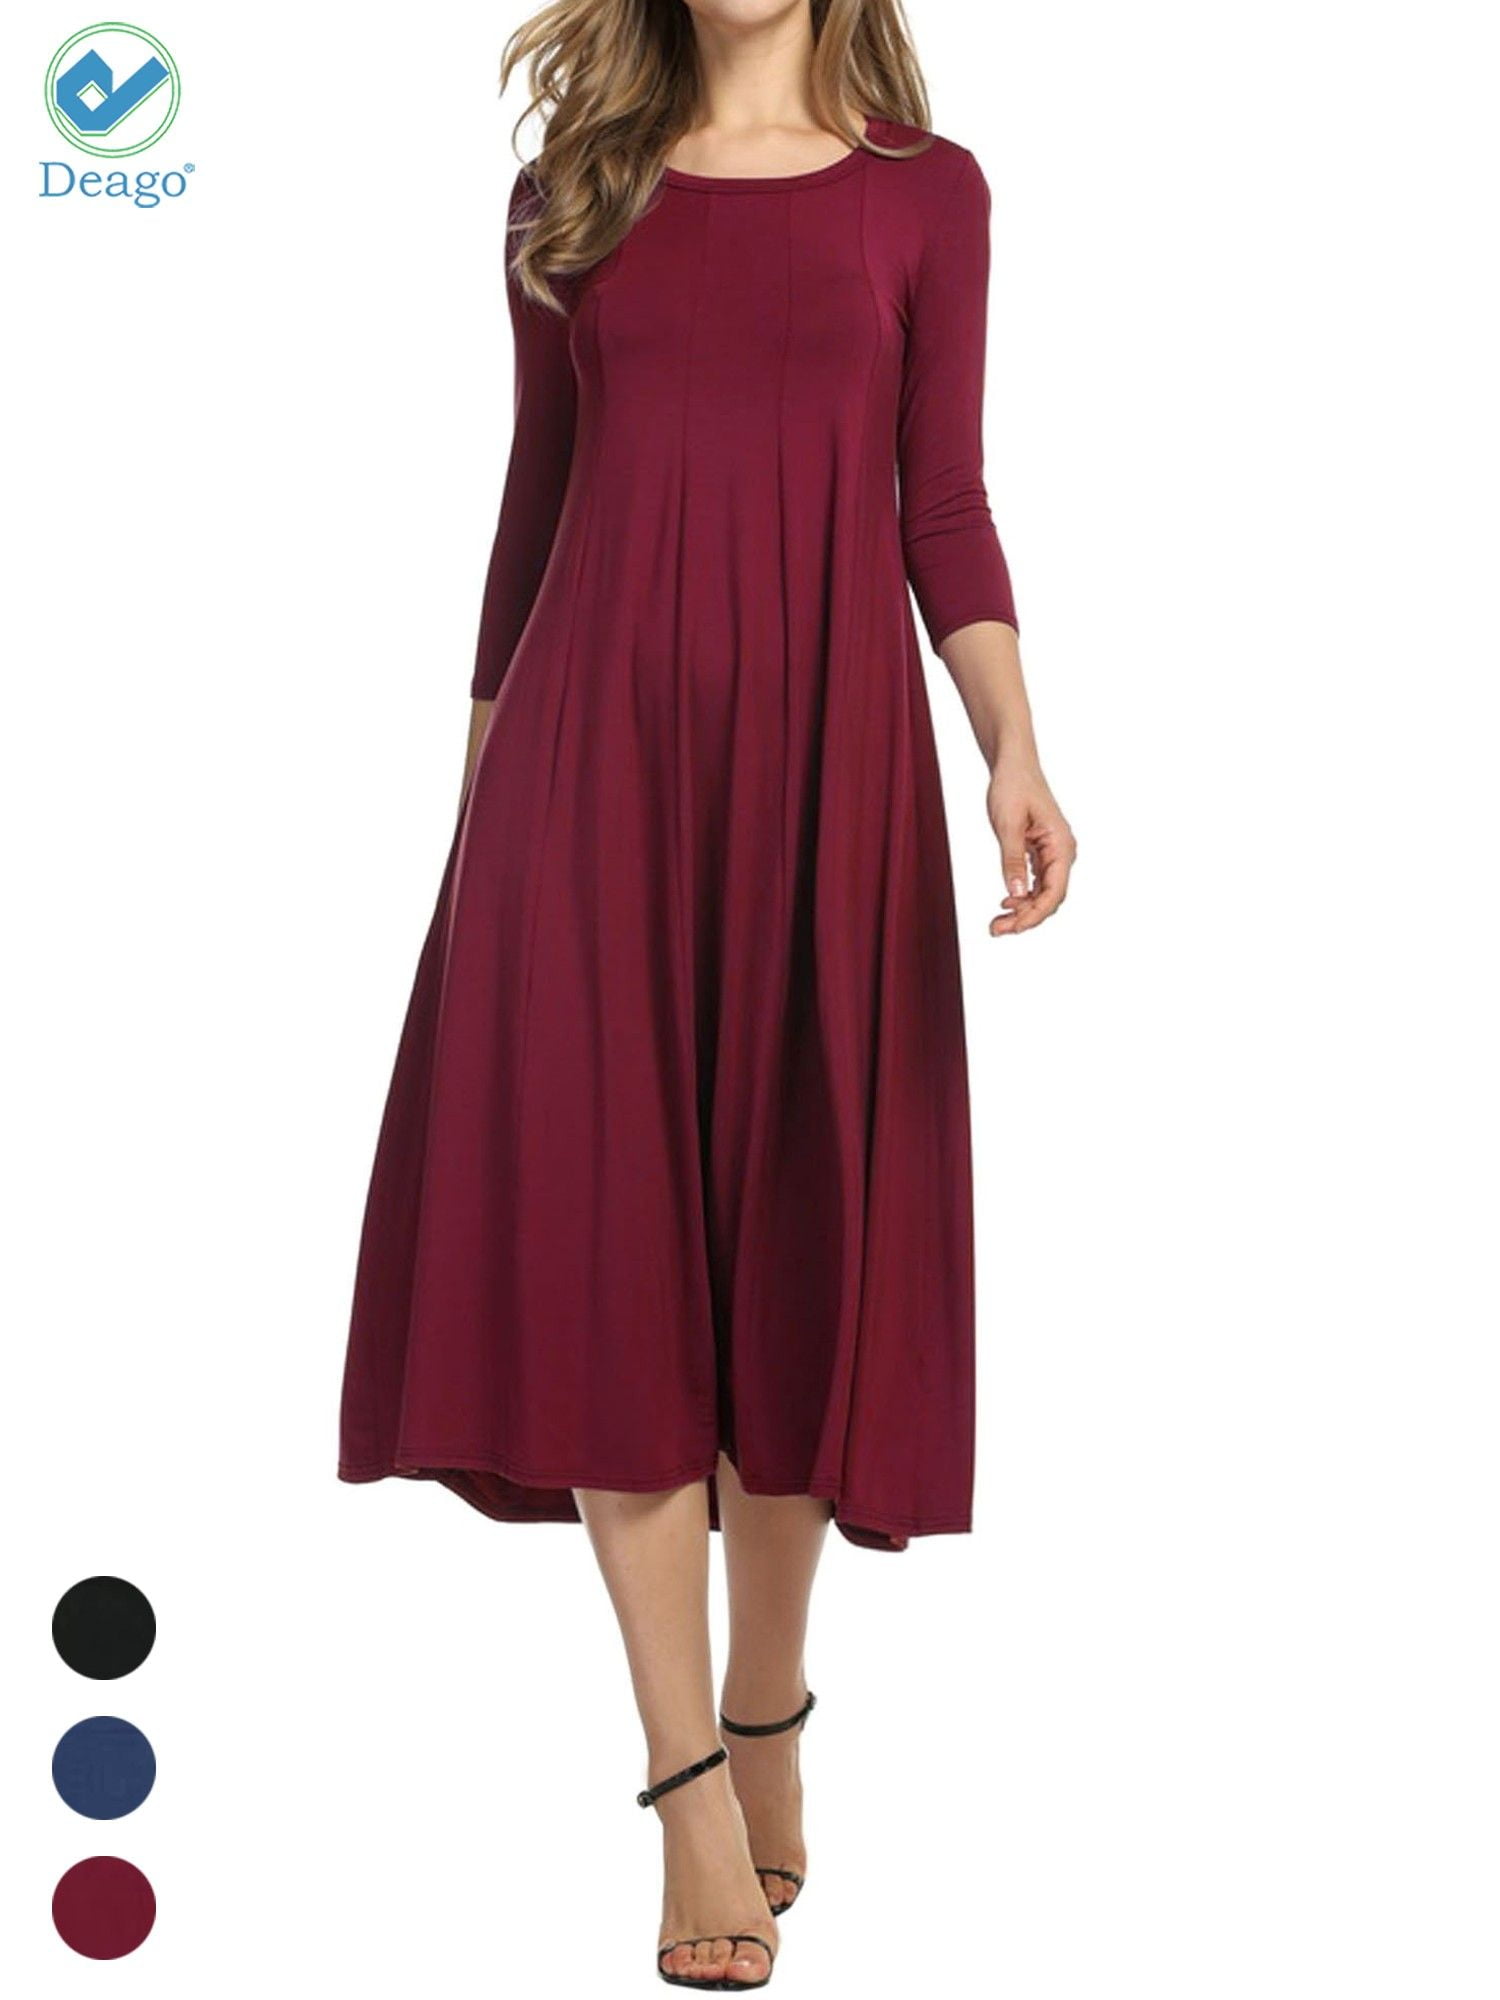 Deago Women's Casual Dresses 3/4 Sleeve Round Neck A-line and Flare Midi  Long Dress For Spring Summer Fall (Red, XL) - Walmart.com